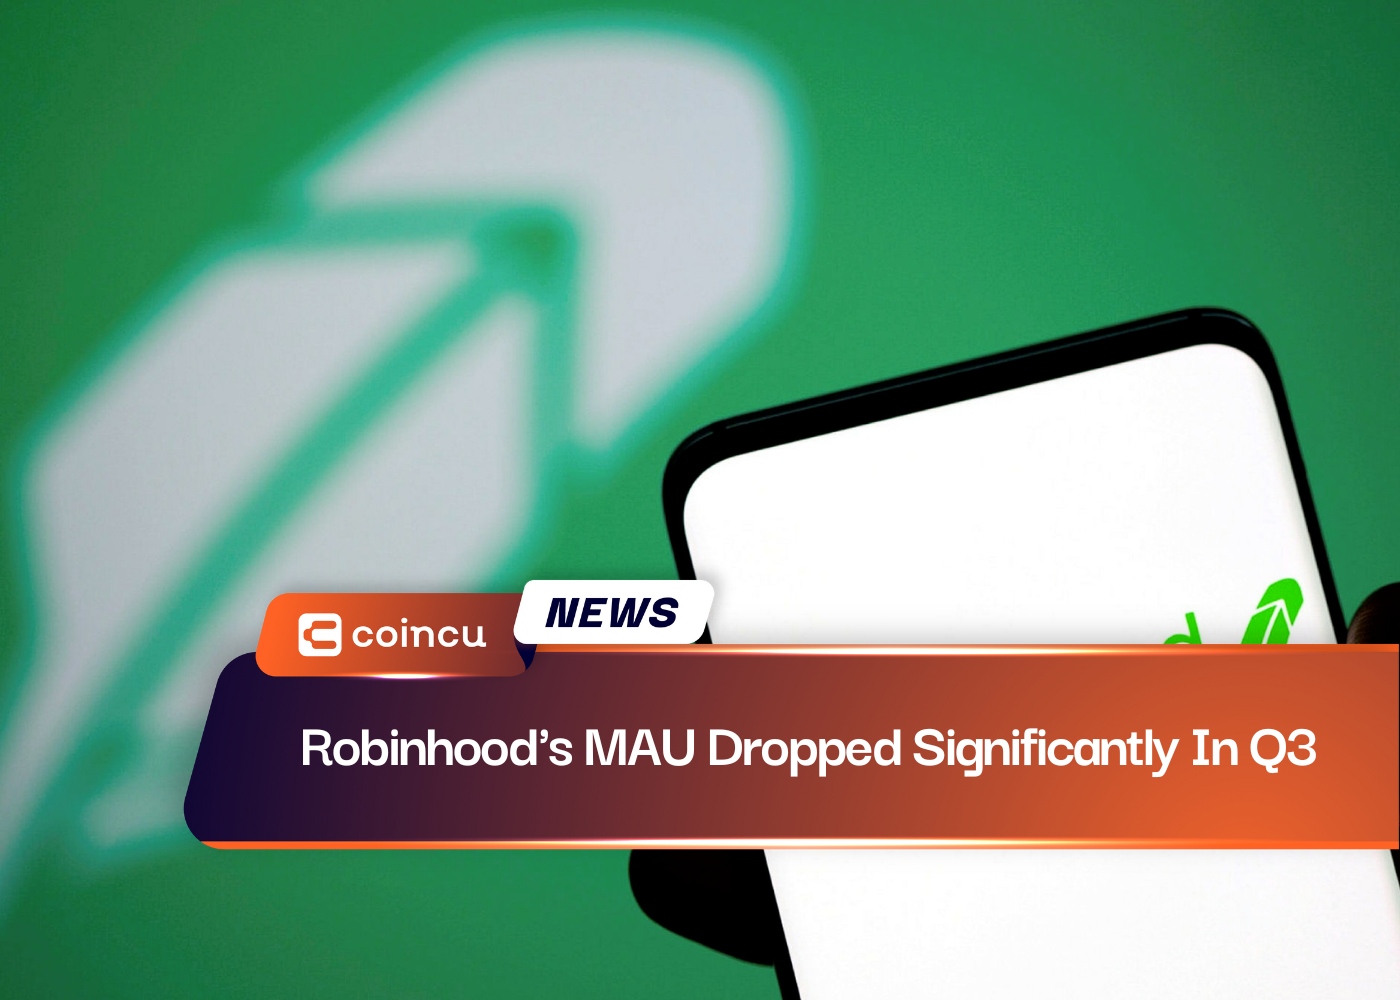 Robinhood's MAU Dropped Significantly In Q3